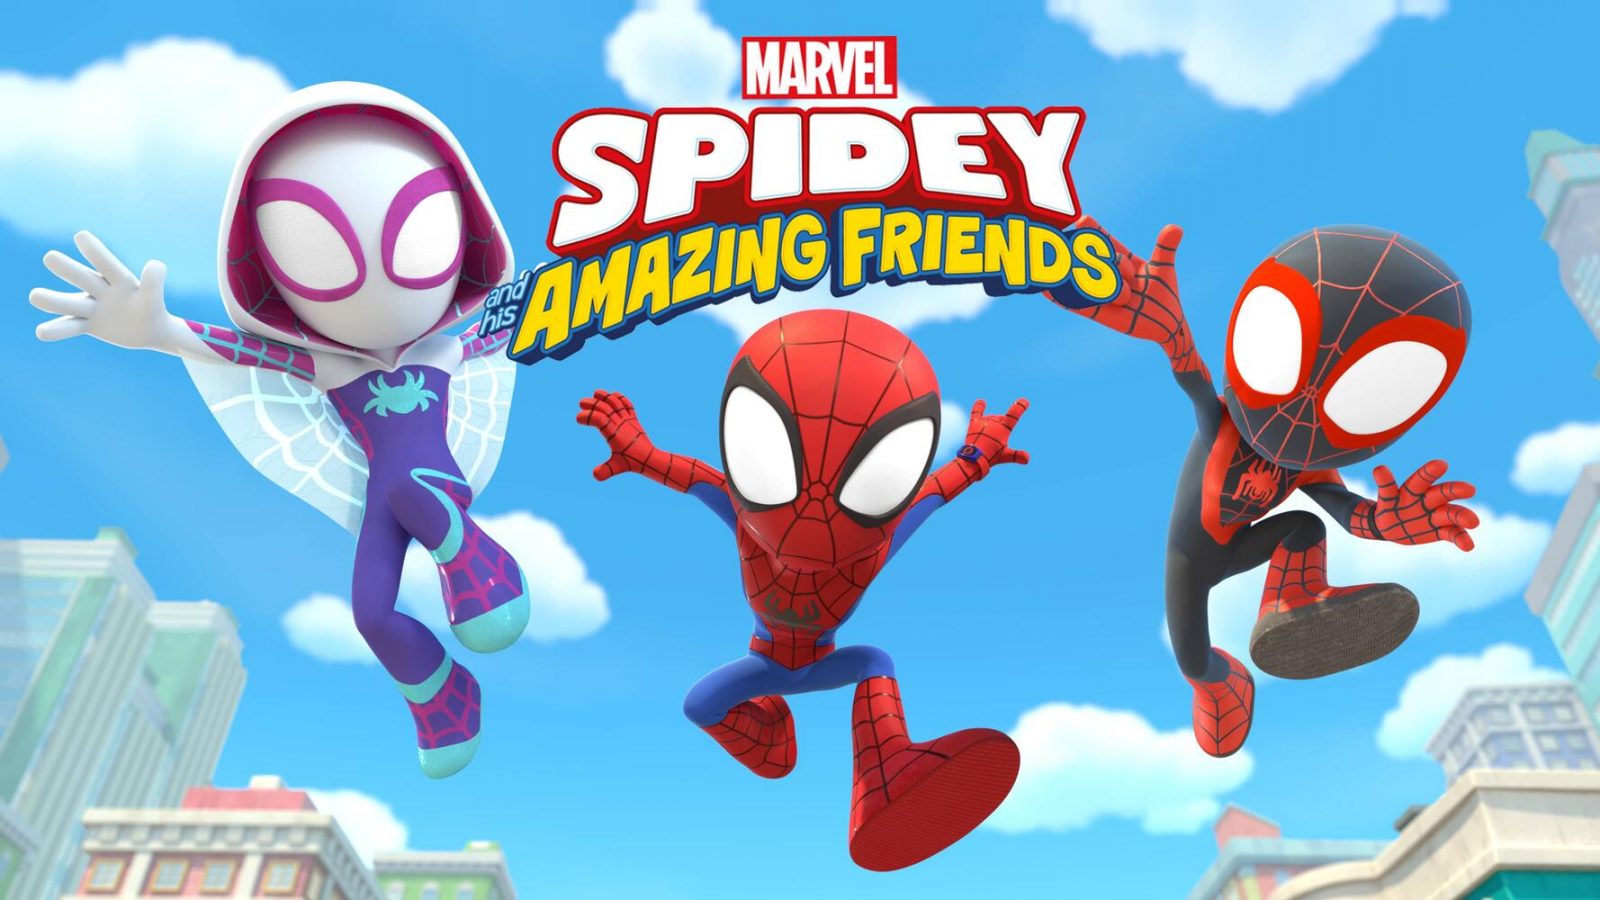 Spidey and Friends Digital Images -  Canada